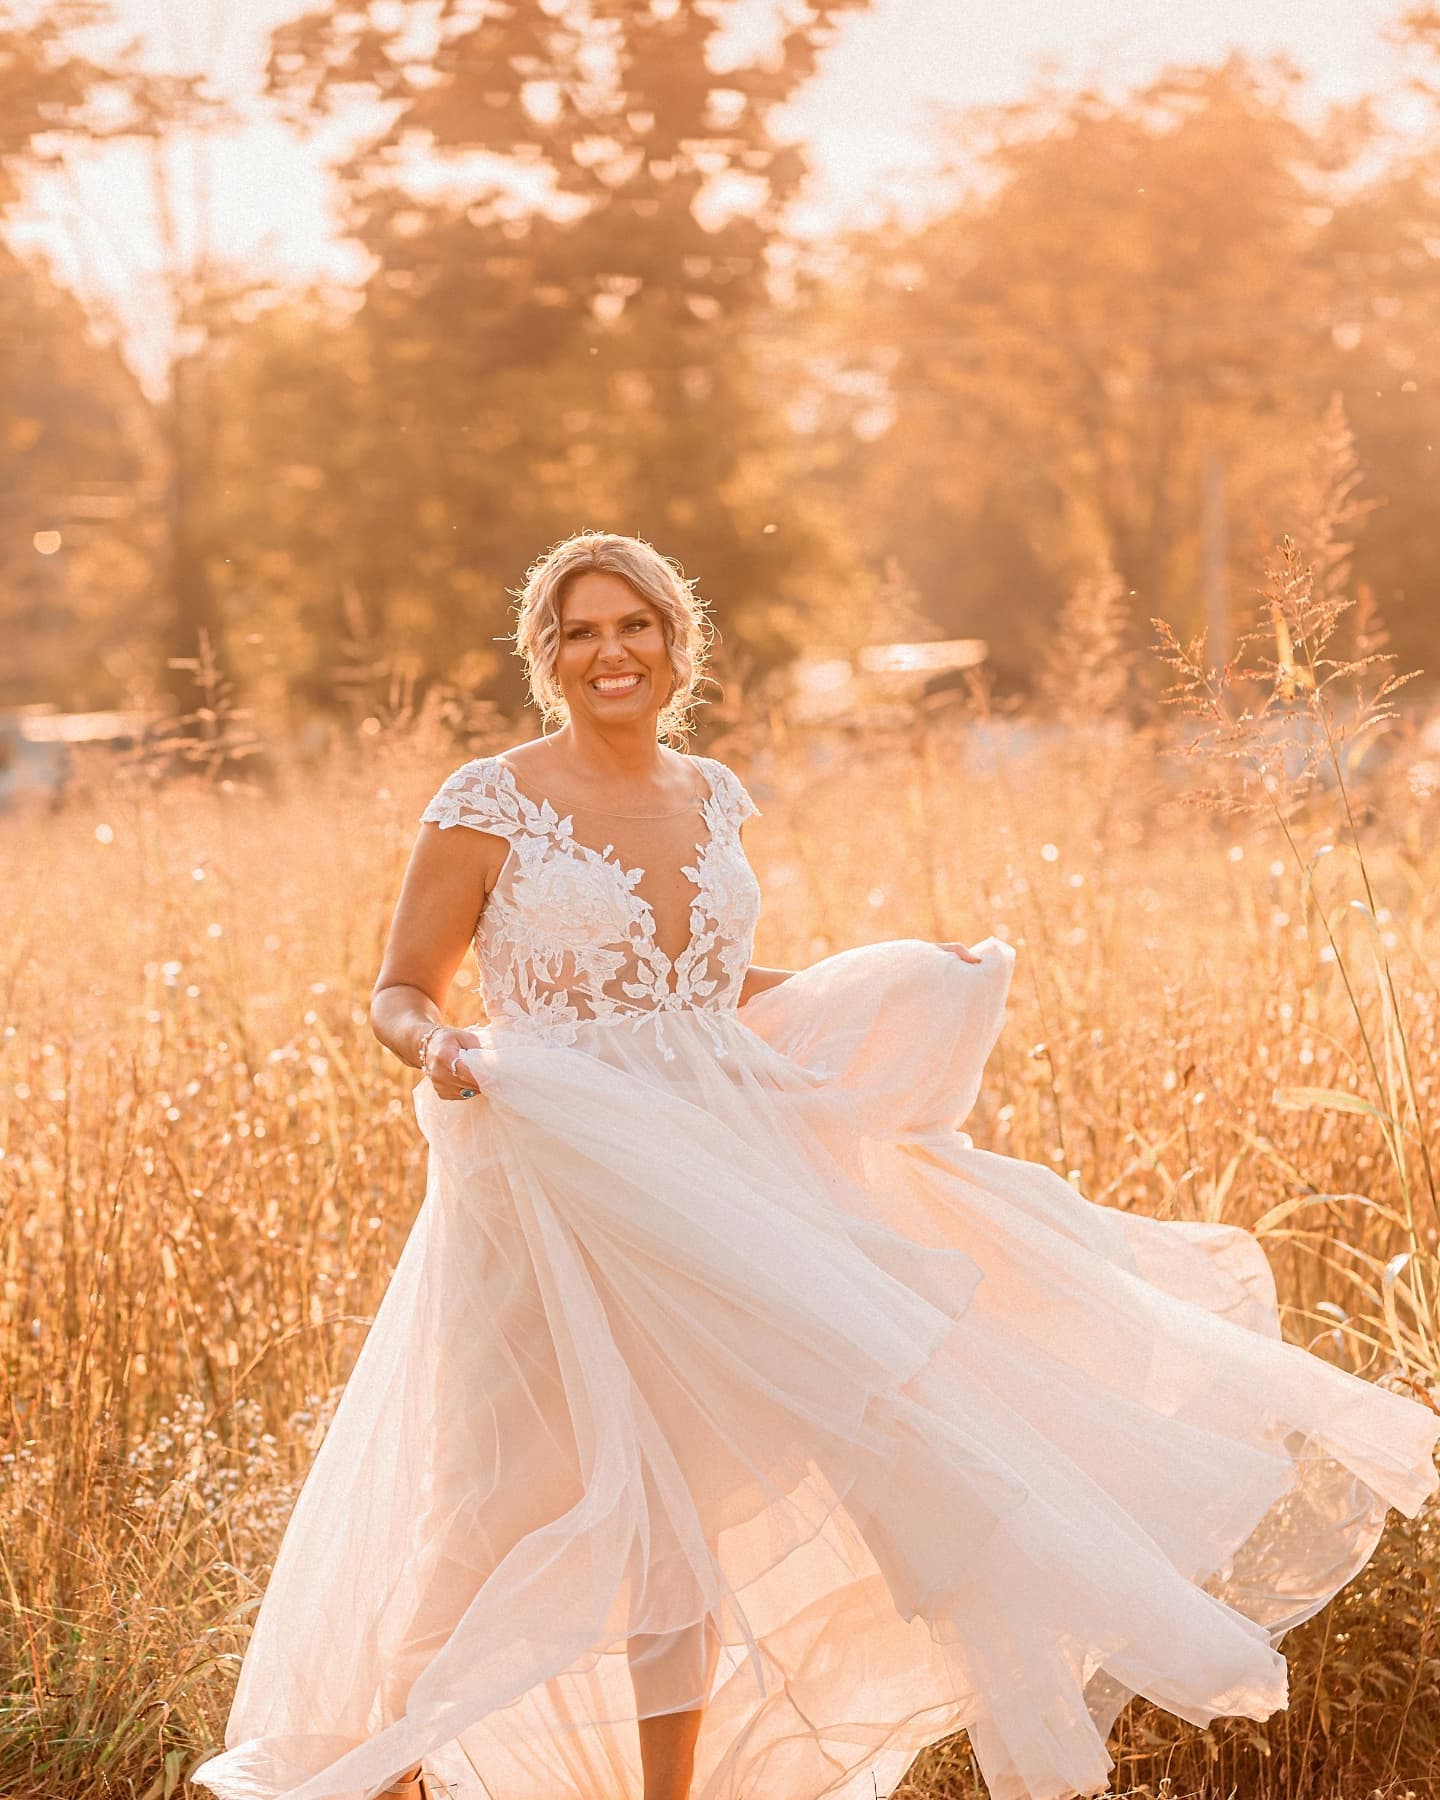 Illusion Cap Sleeve Lace Appliqued Wedding Dress - bride in a field at golden hour